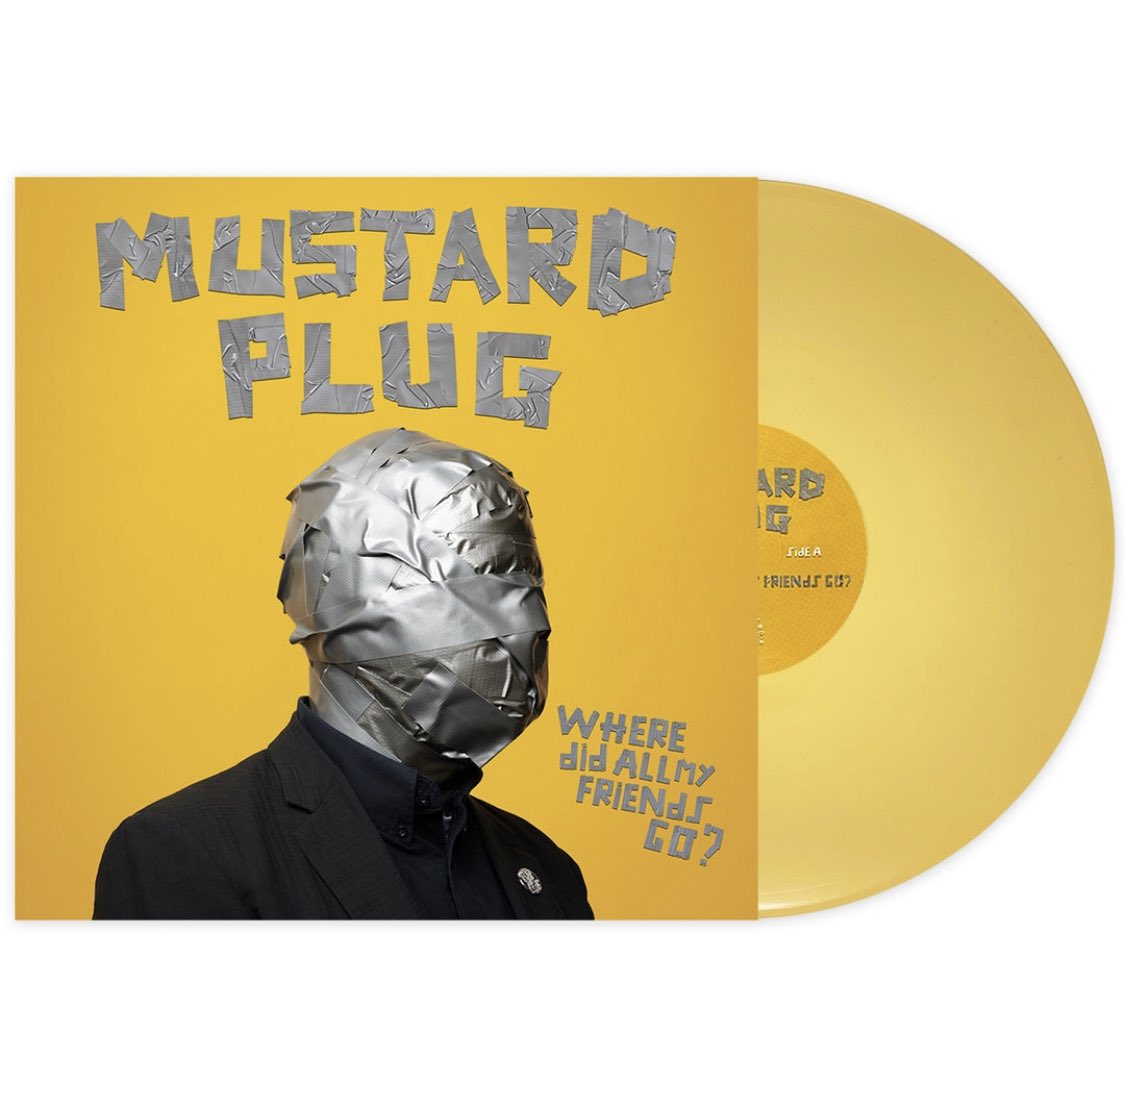 GIVEAWAY! WIN A VINYL OF MUSTARD PLUG’S NEWEST ALBUM, “WHERE DID ALL MY FRIENDS GO”. RULES: -Like & retweet to enter -Follow @thefestfl & @Mustard_Plug -Bonus entries if you share your fav FEST memory below 👇 Winner will be announced this Friday at 10am EST!